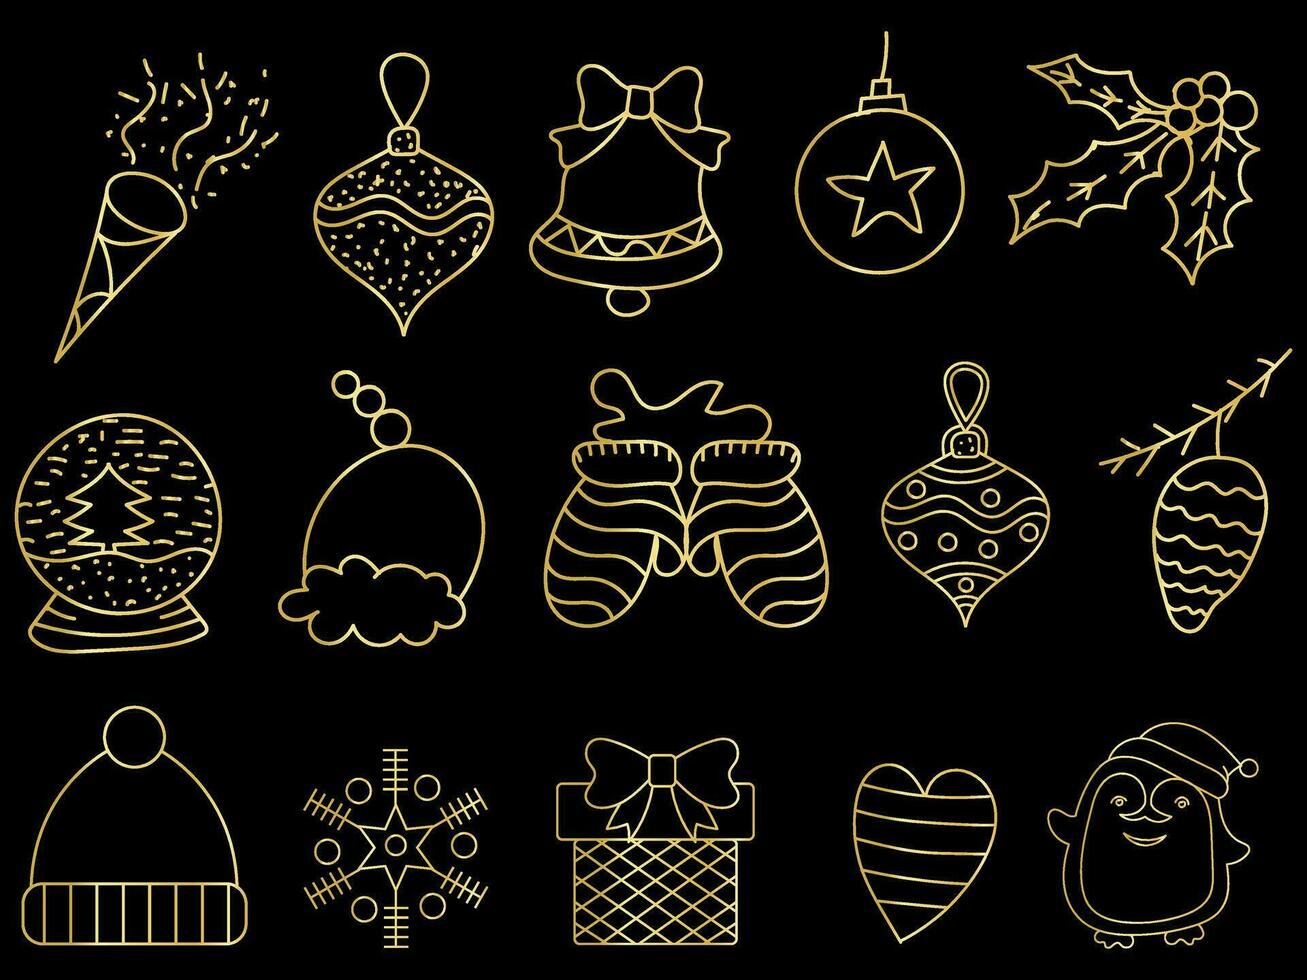 Golden christmas ornaments set with balls, snowflakes, hats, star, Christmas tree, orange, sock, gift, drink and garlands. vector